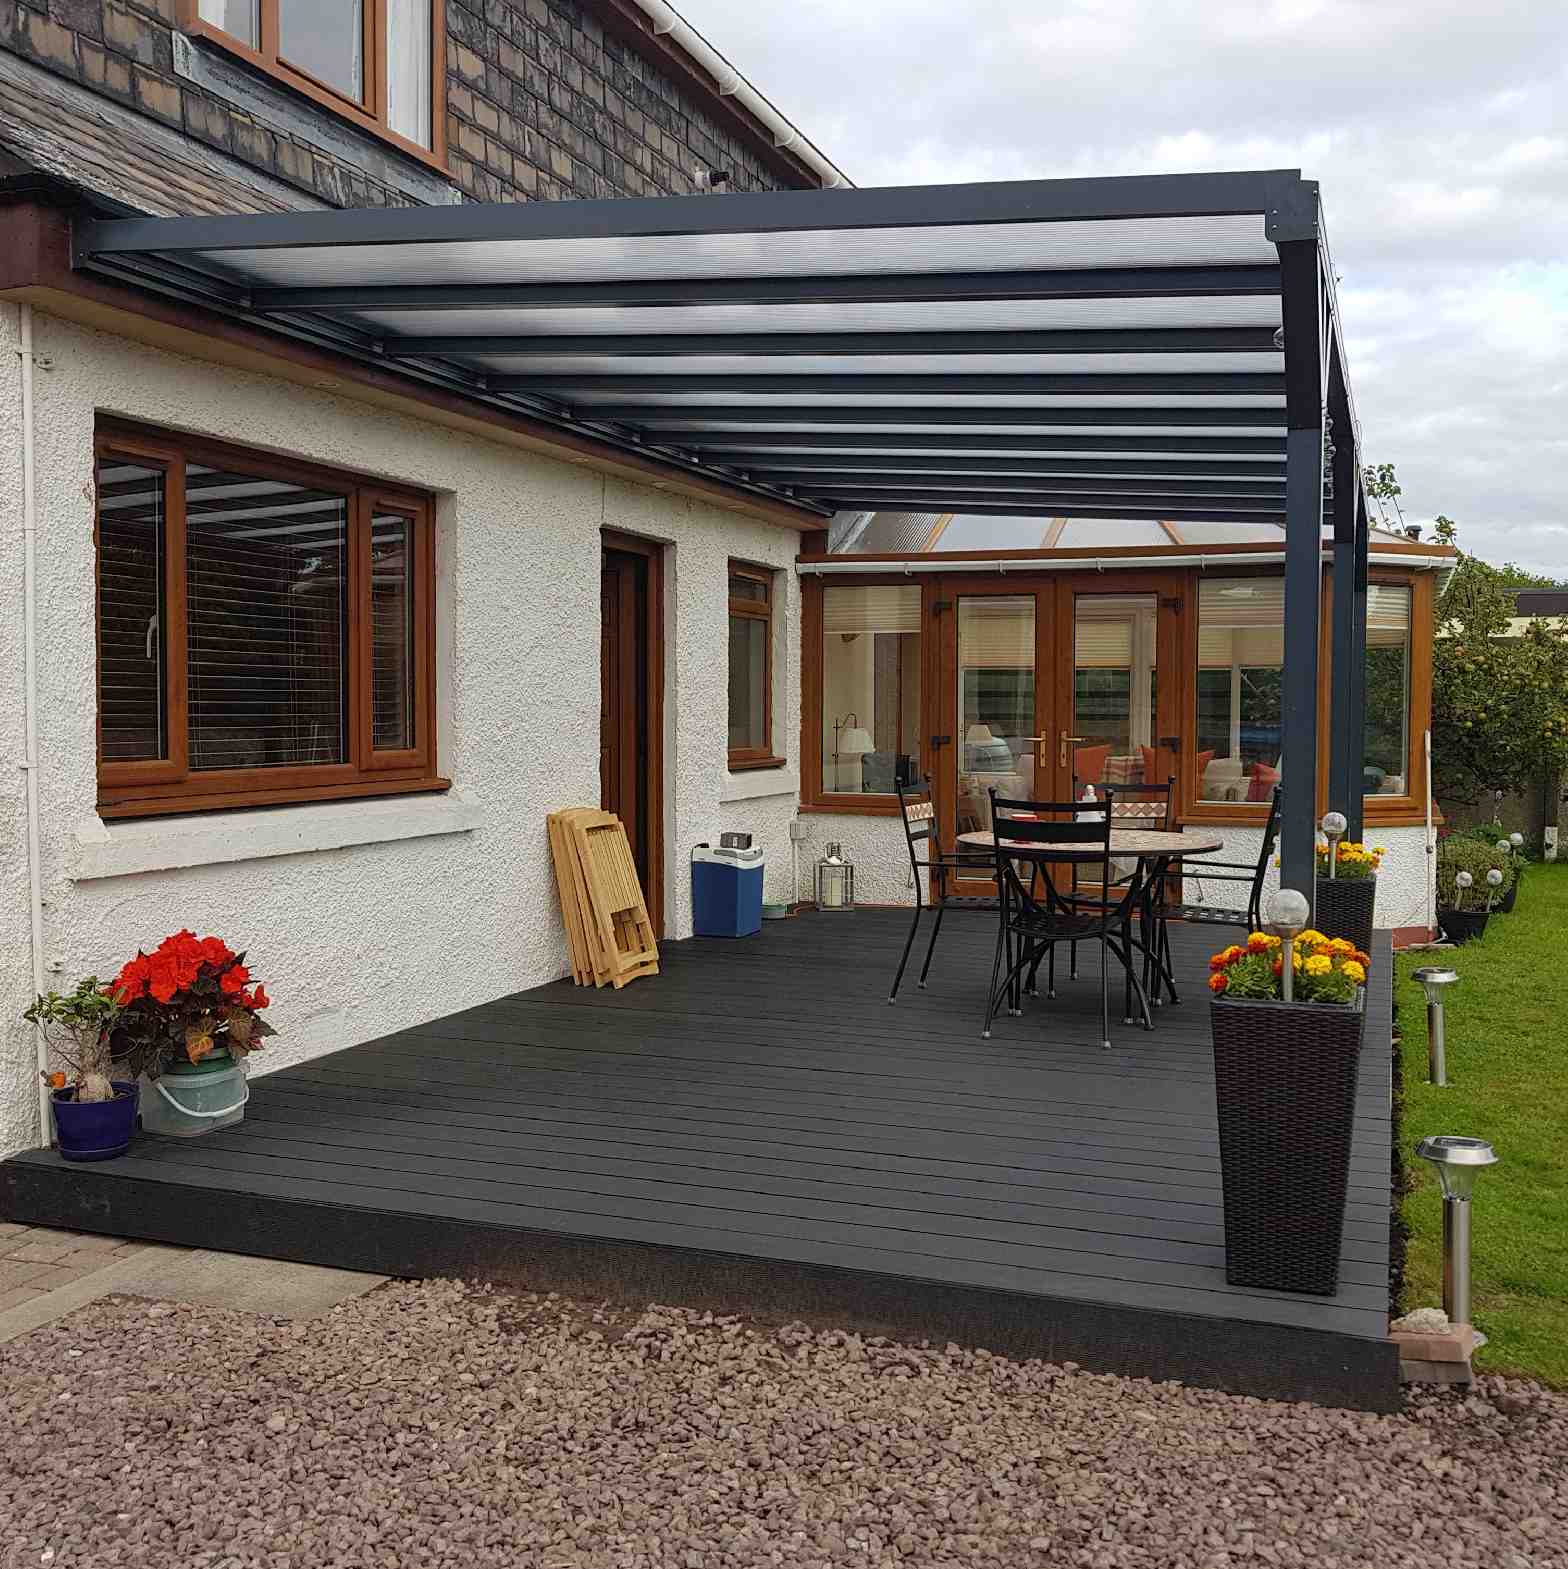 Buy Omega Verandah, Anthracite Grey, 16mm Polycarbonate Glazing - 10.6m (W) x 3.0m (P), (5) Supporting Posts online today